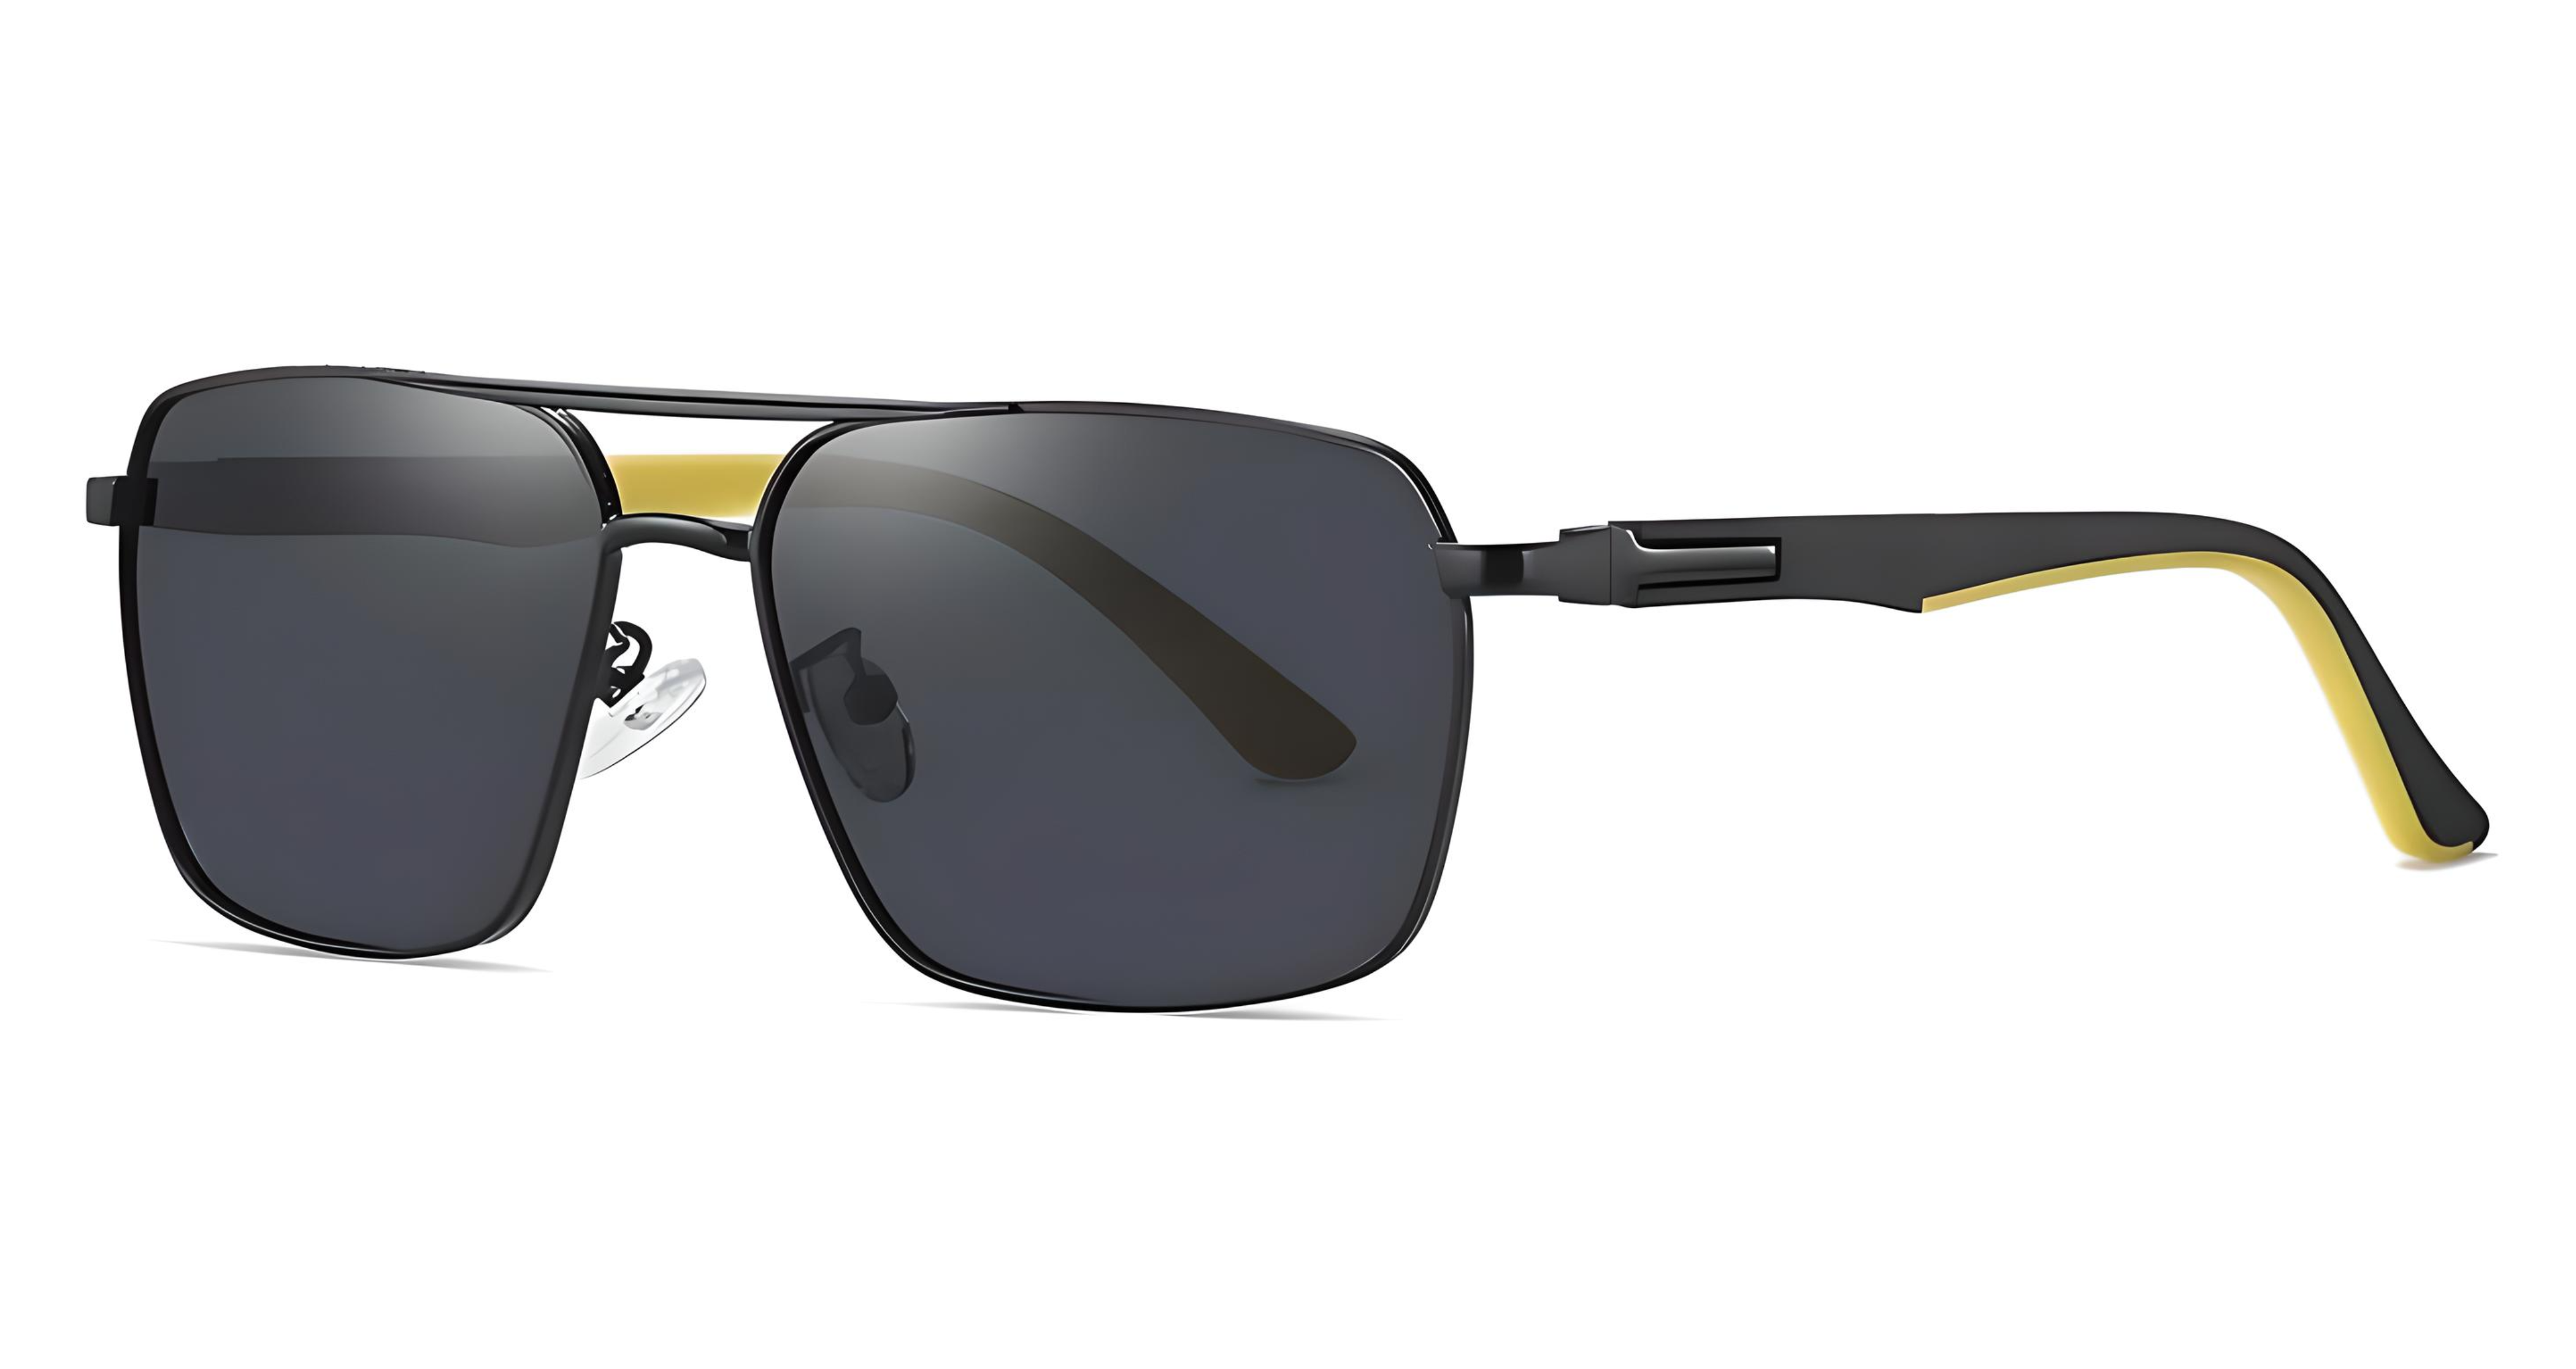 "Clearvue" Polarized